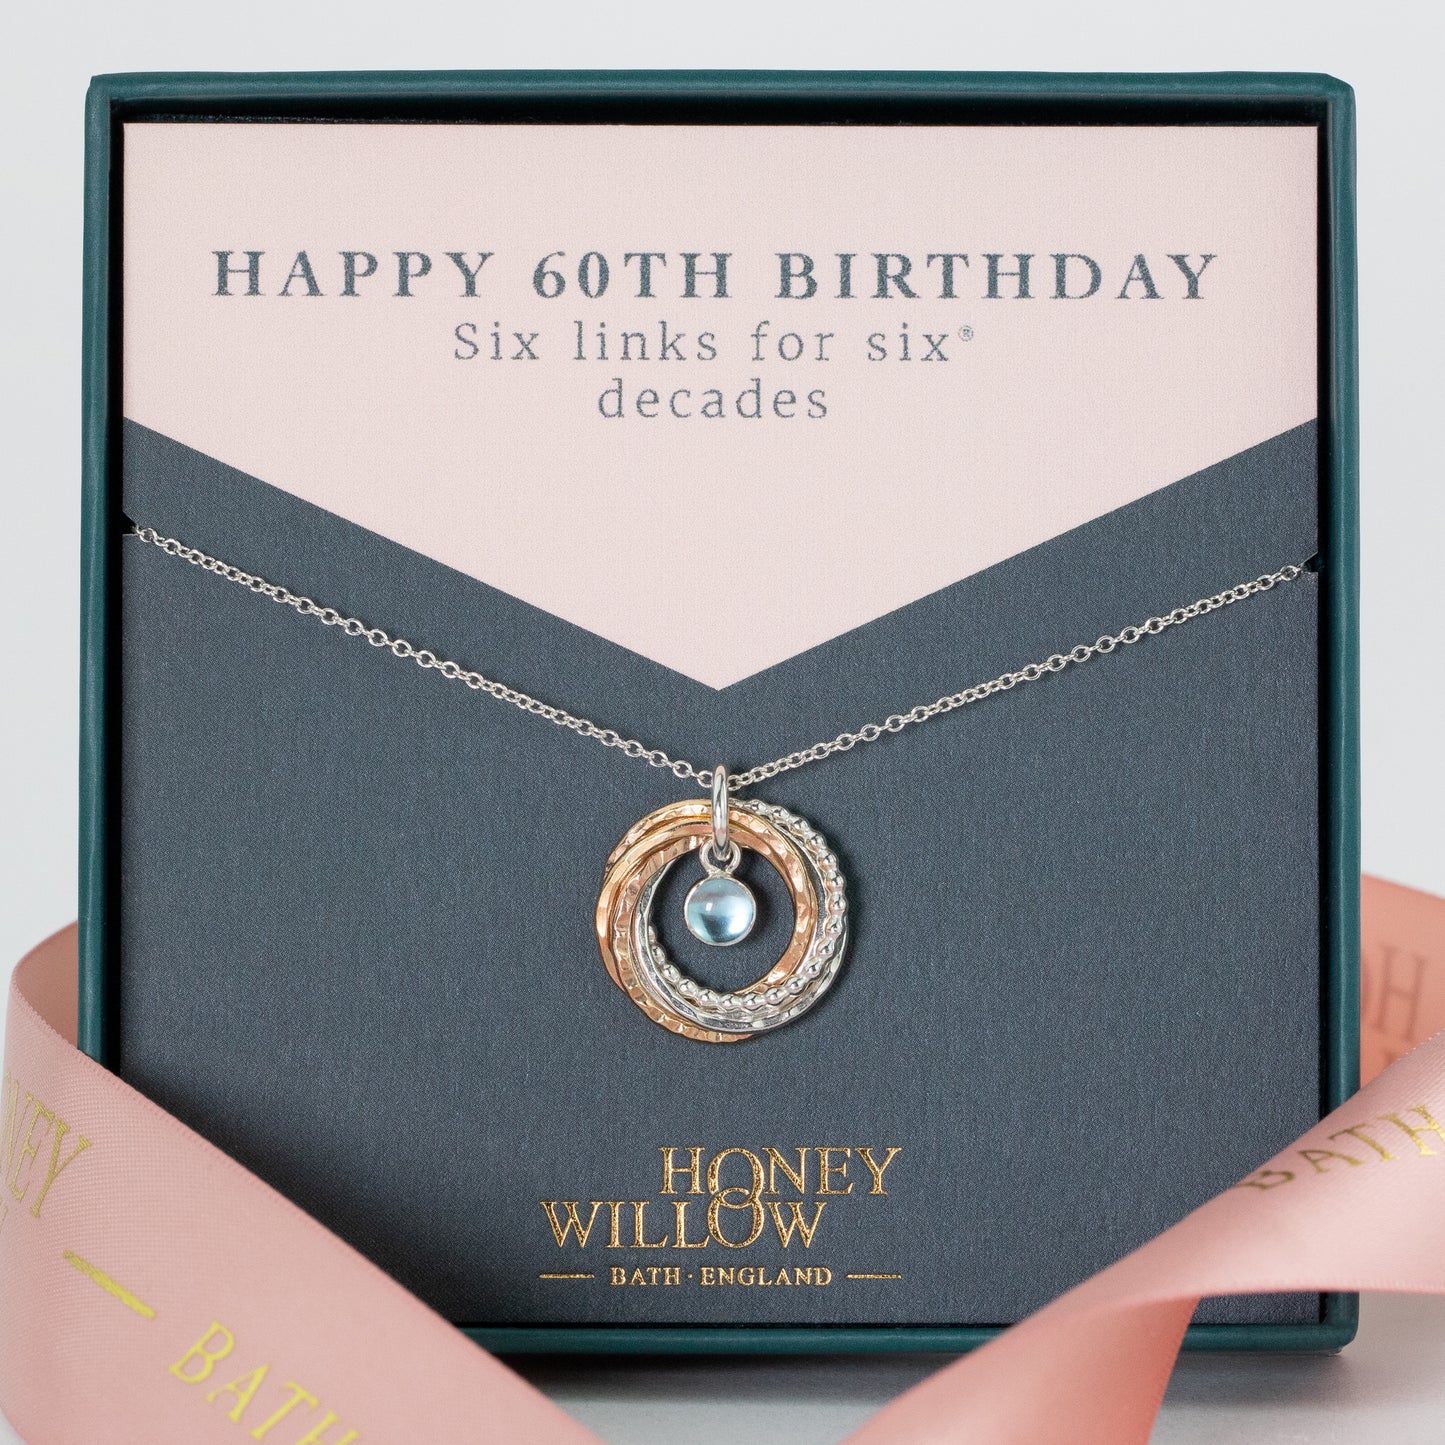 60th Birthday Birthstone Necklace - The Original 6 Links for 6 Decades Necklace - Silver & Gold